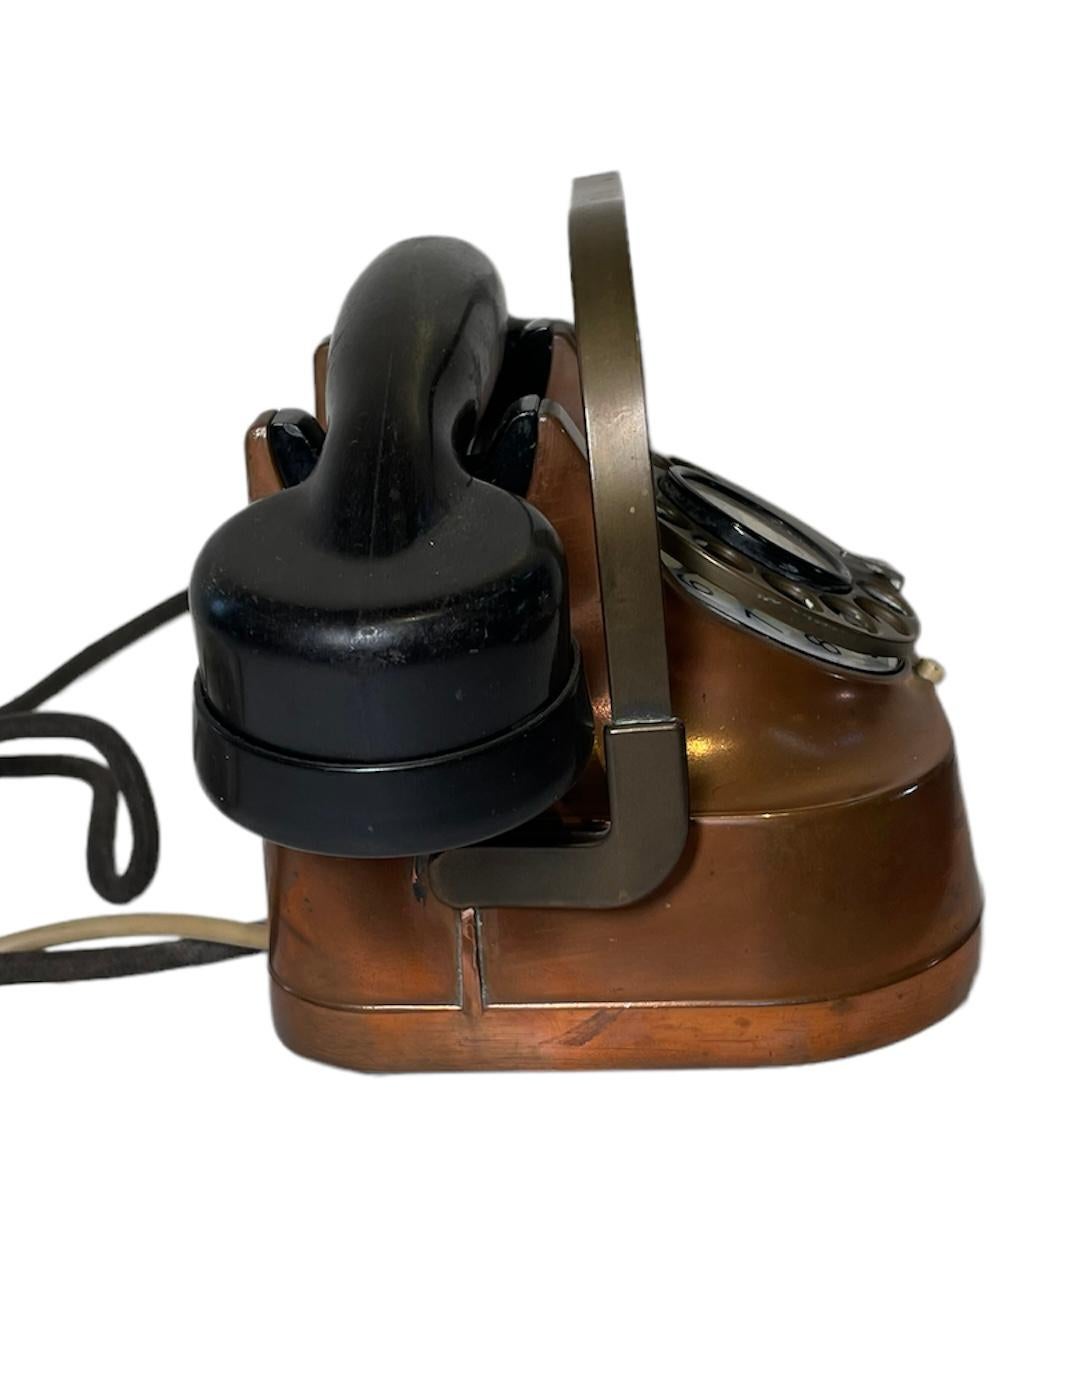 20th Century FTR Copper Rotary Dial Table / Desk Telephone For Sale